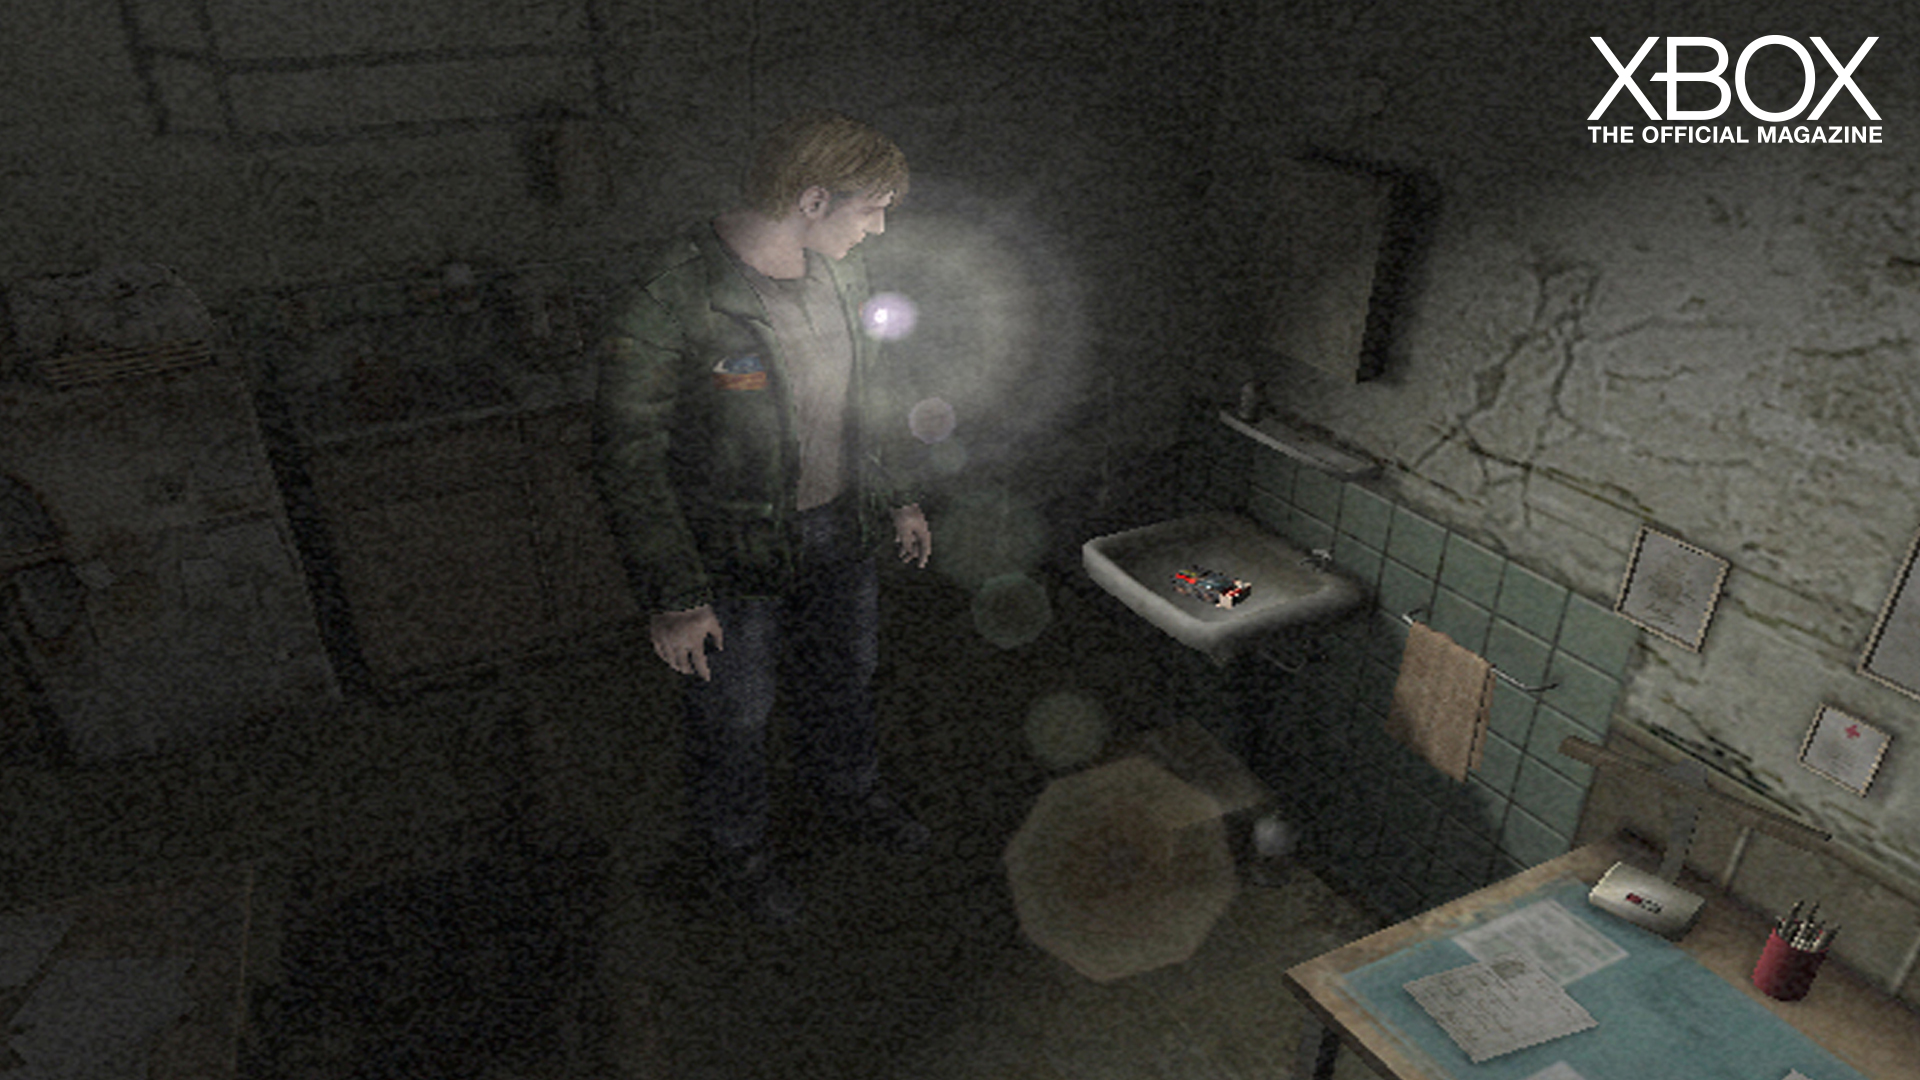 Silent Hill 2' At 20: A Horror Masterpiece